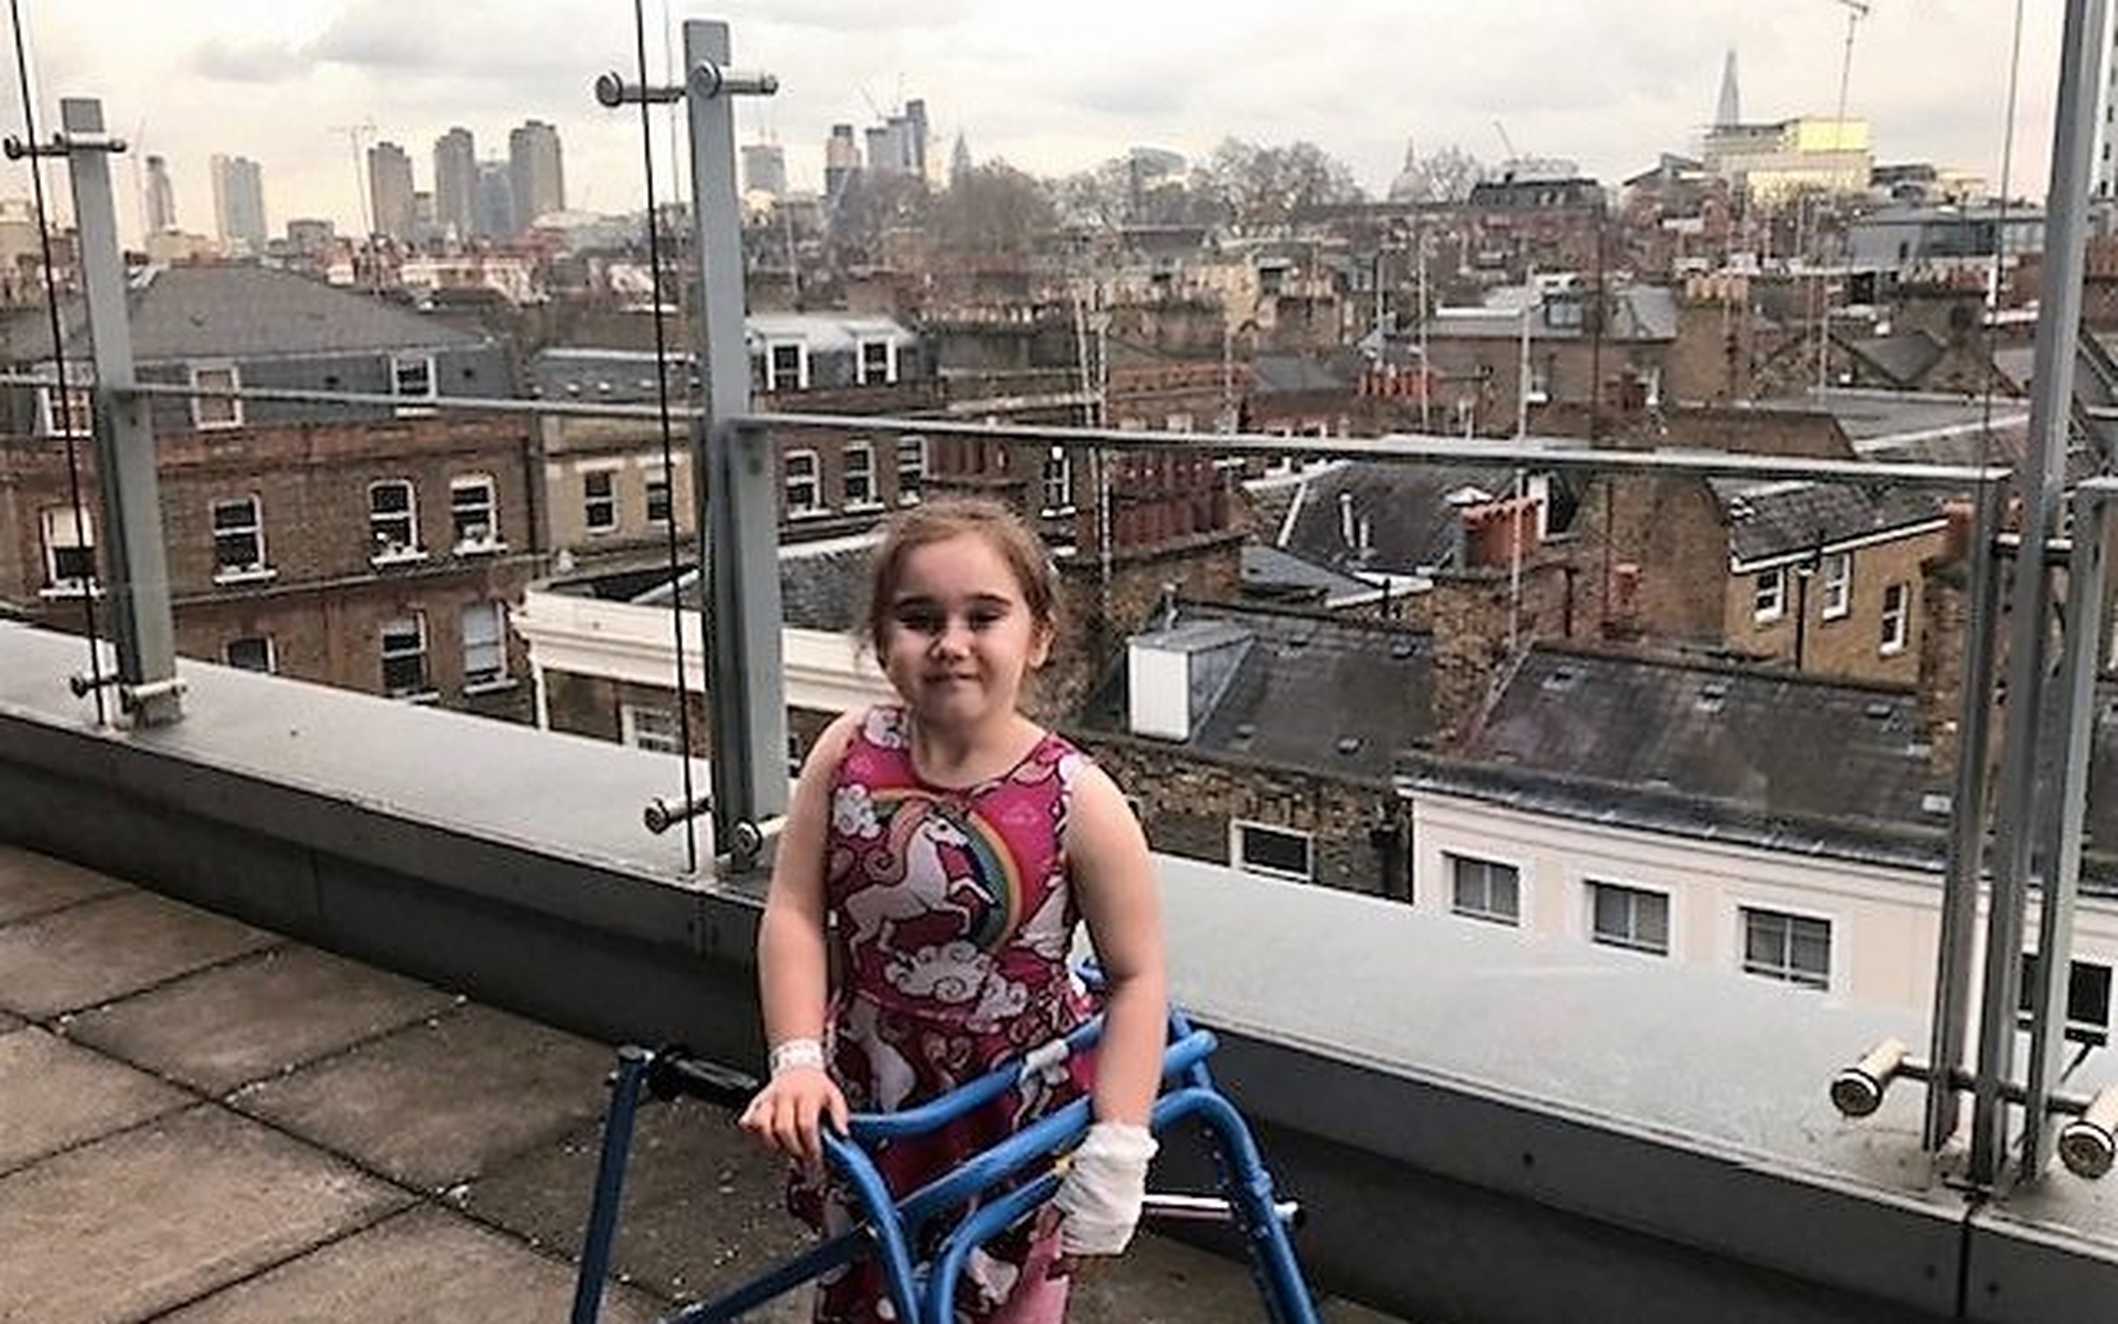 Angel on the balcony at GOSH, with The Shard visible in the distance.